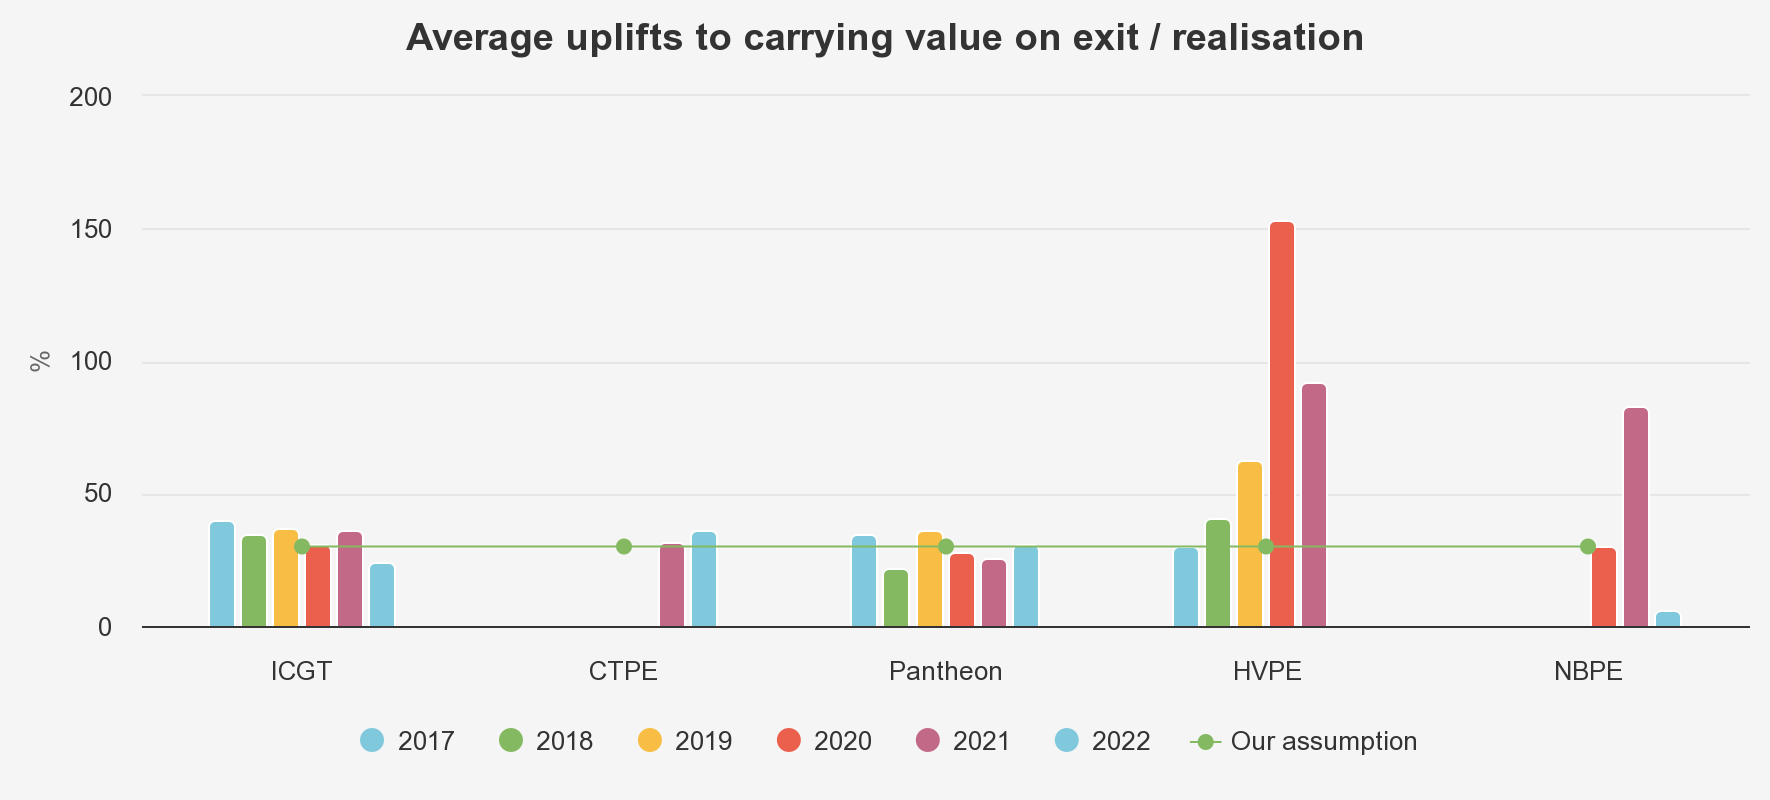 AVERAGE UPLIFTS TO CARRYING VALUE ON EXIT/REALISATION